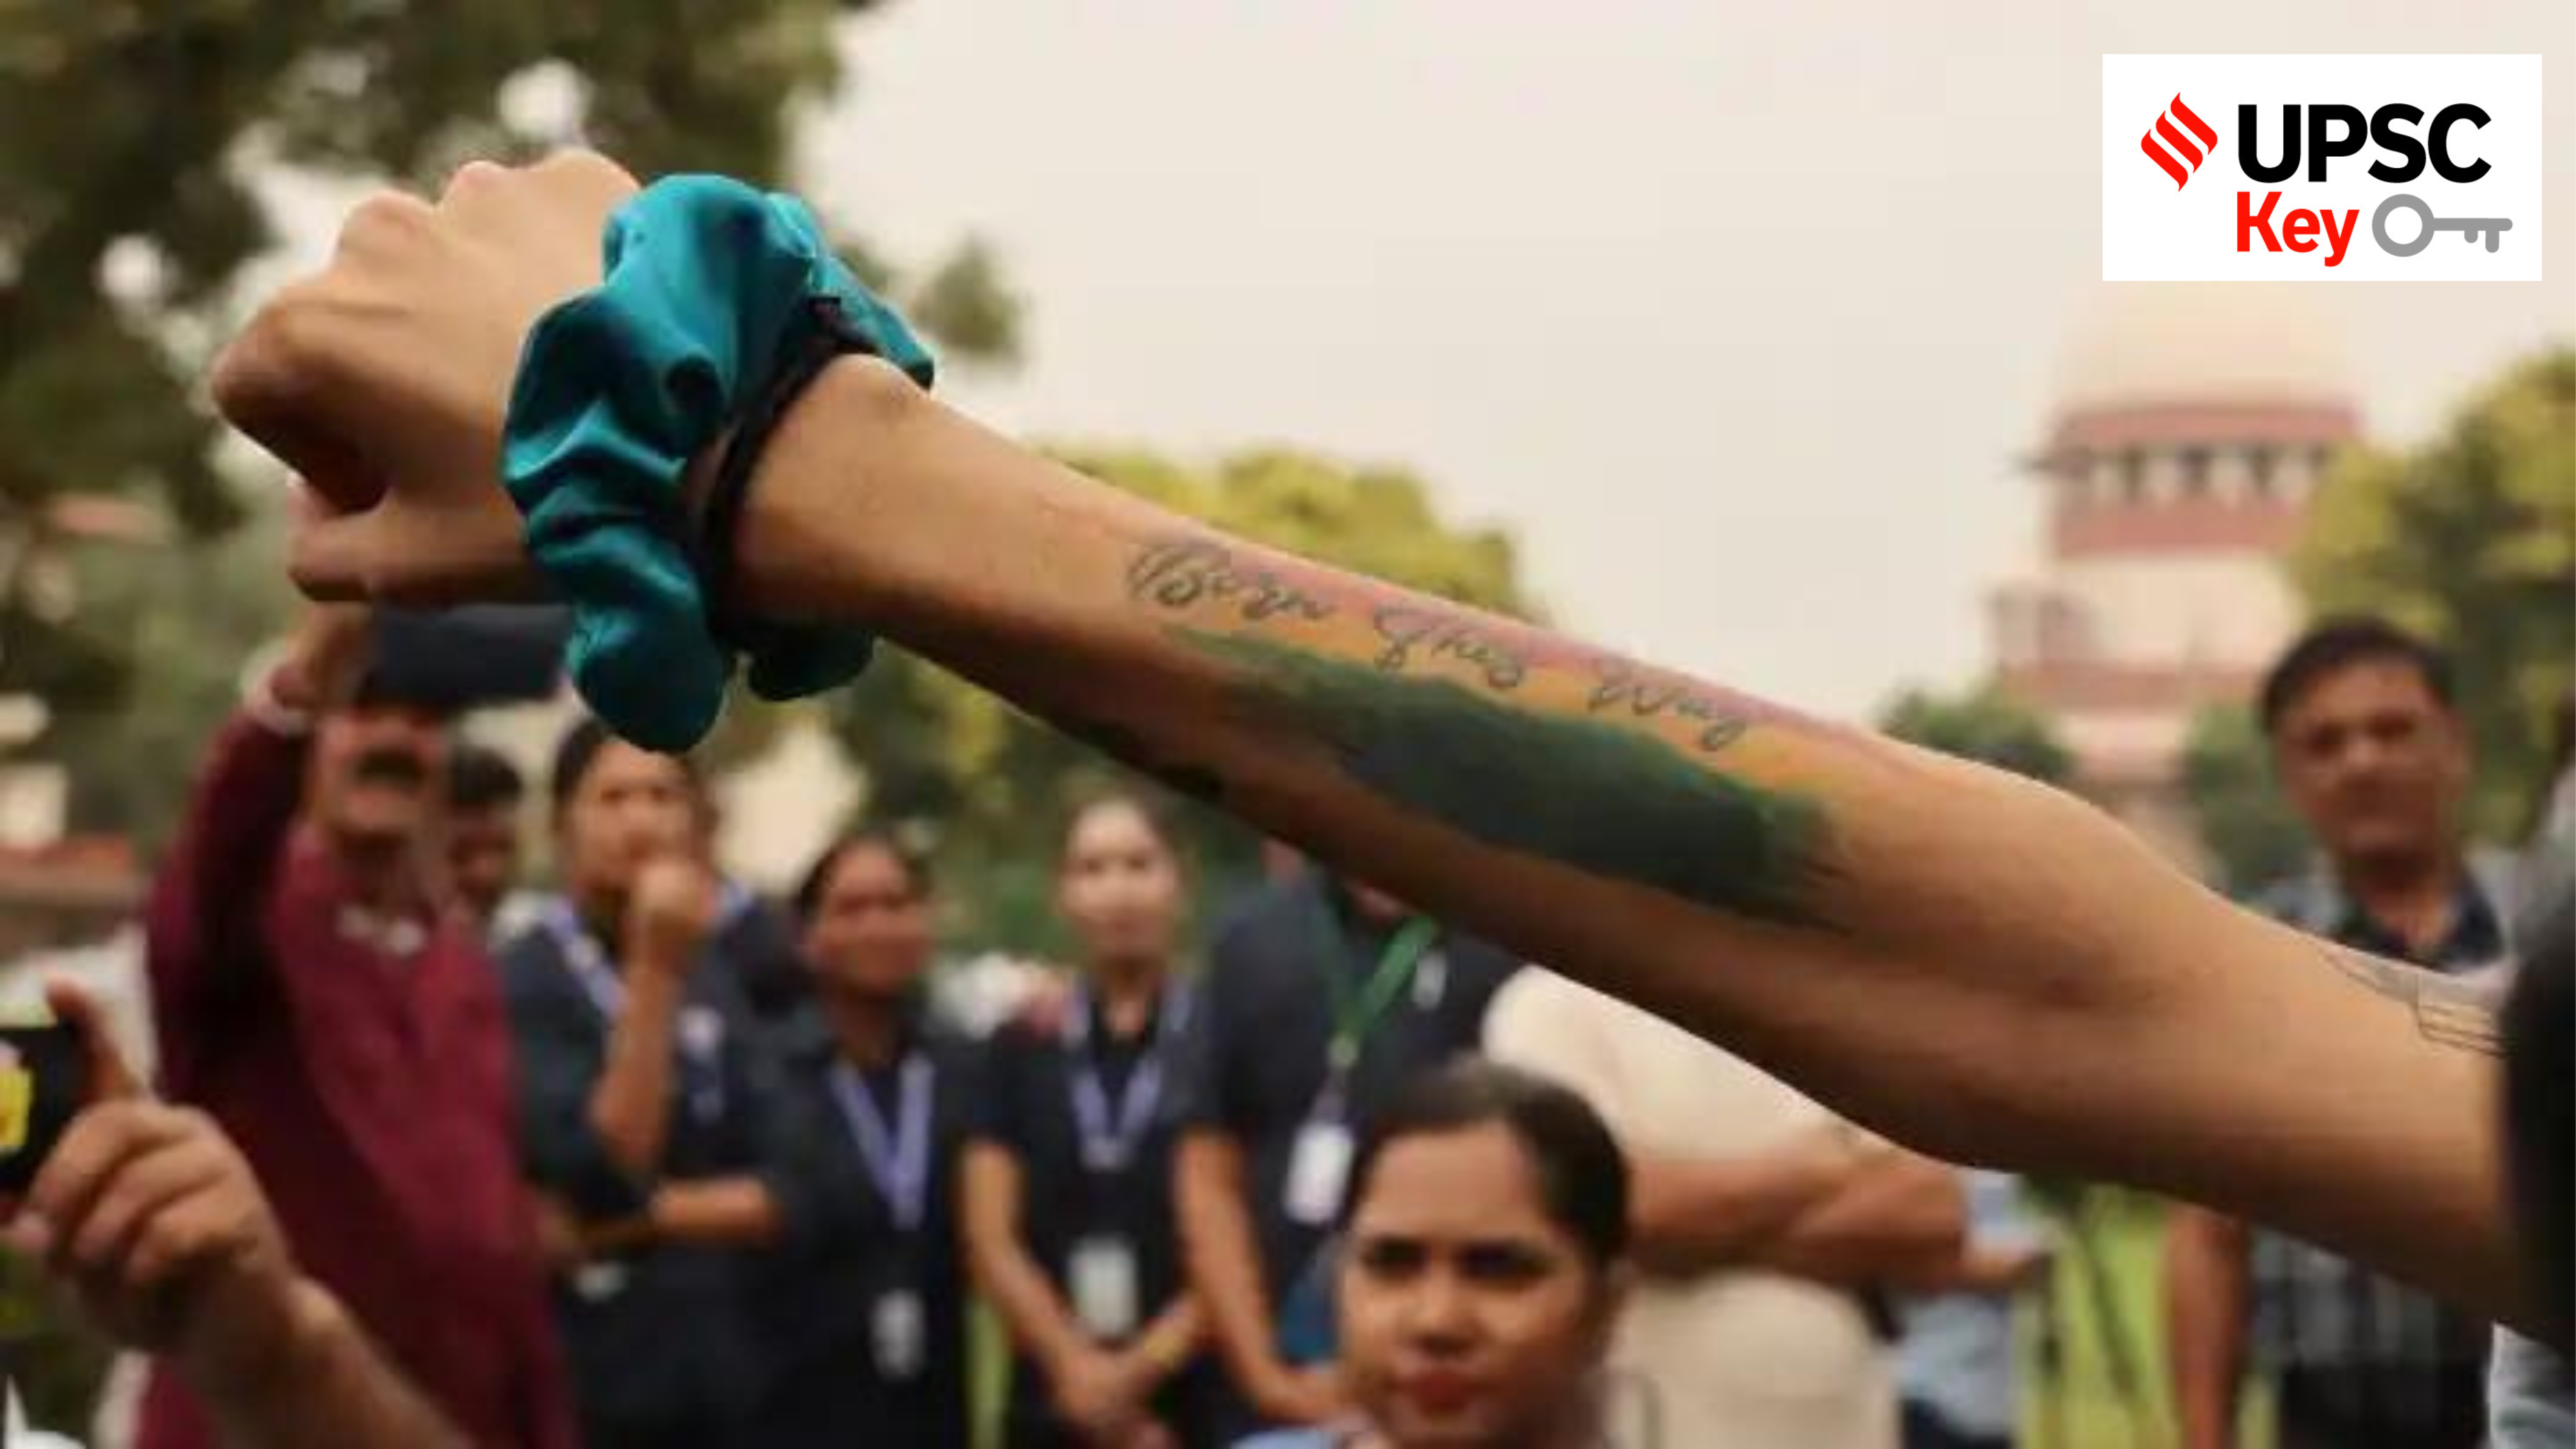 Are visible tattoos allowed in IAS? - Quora